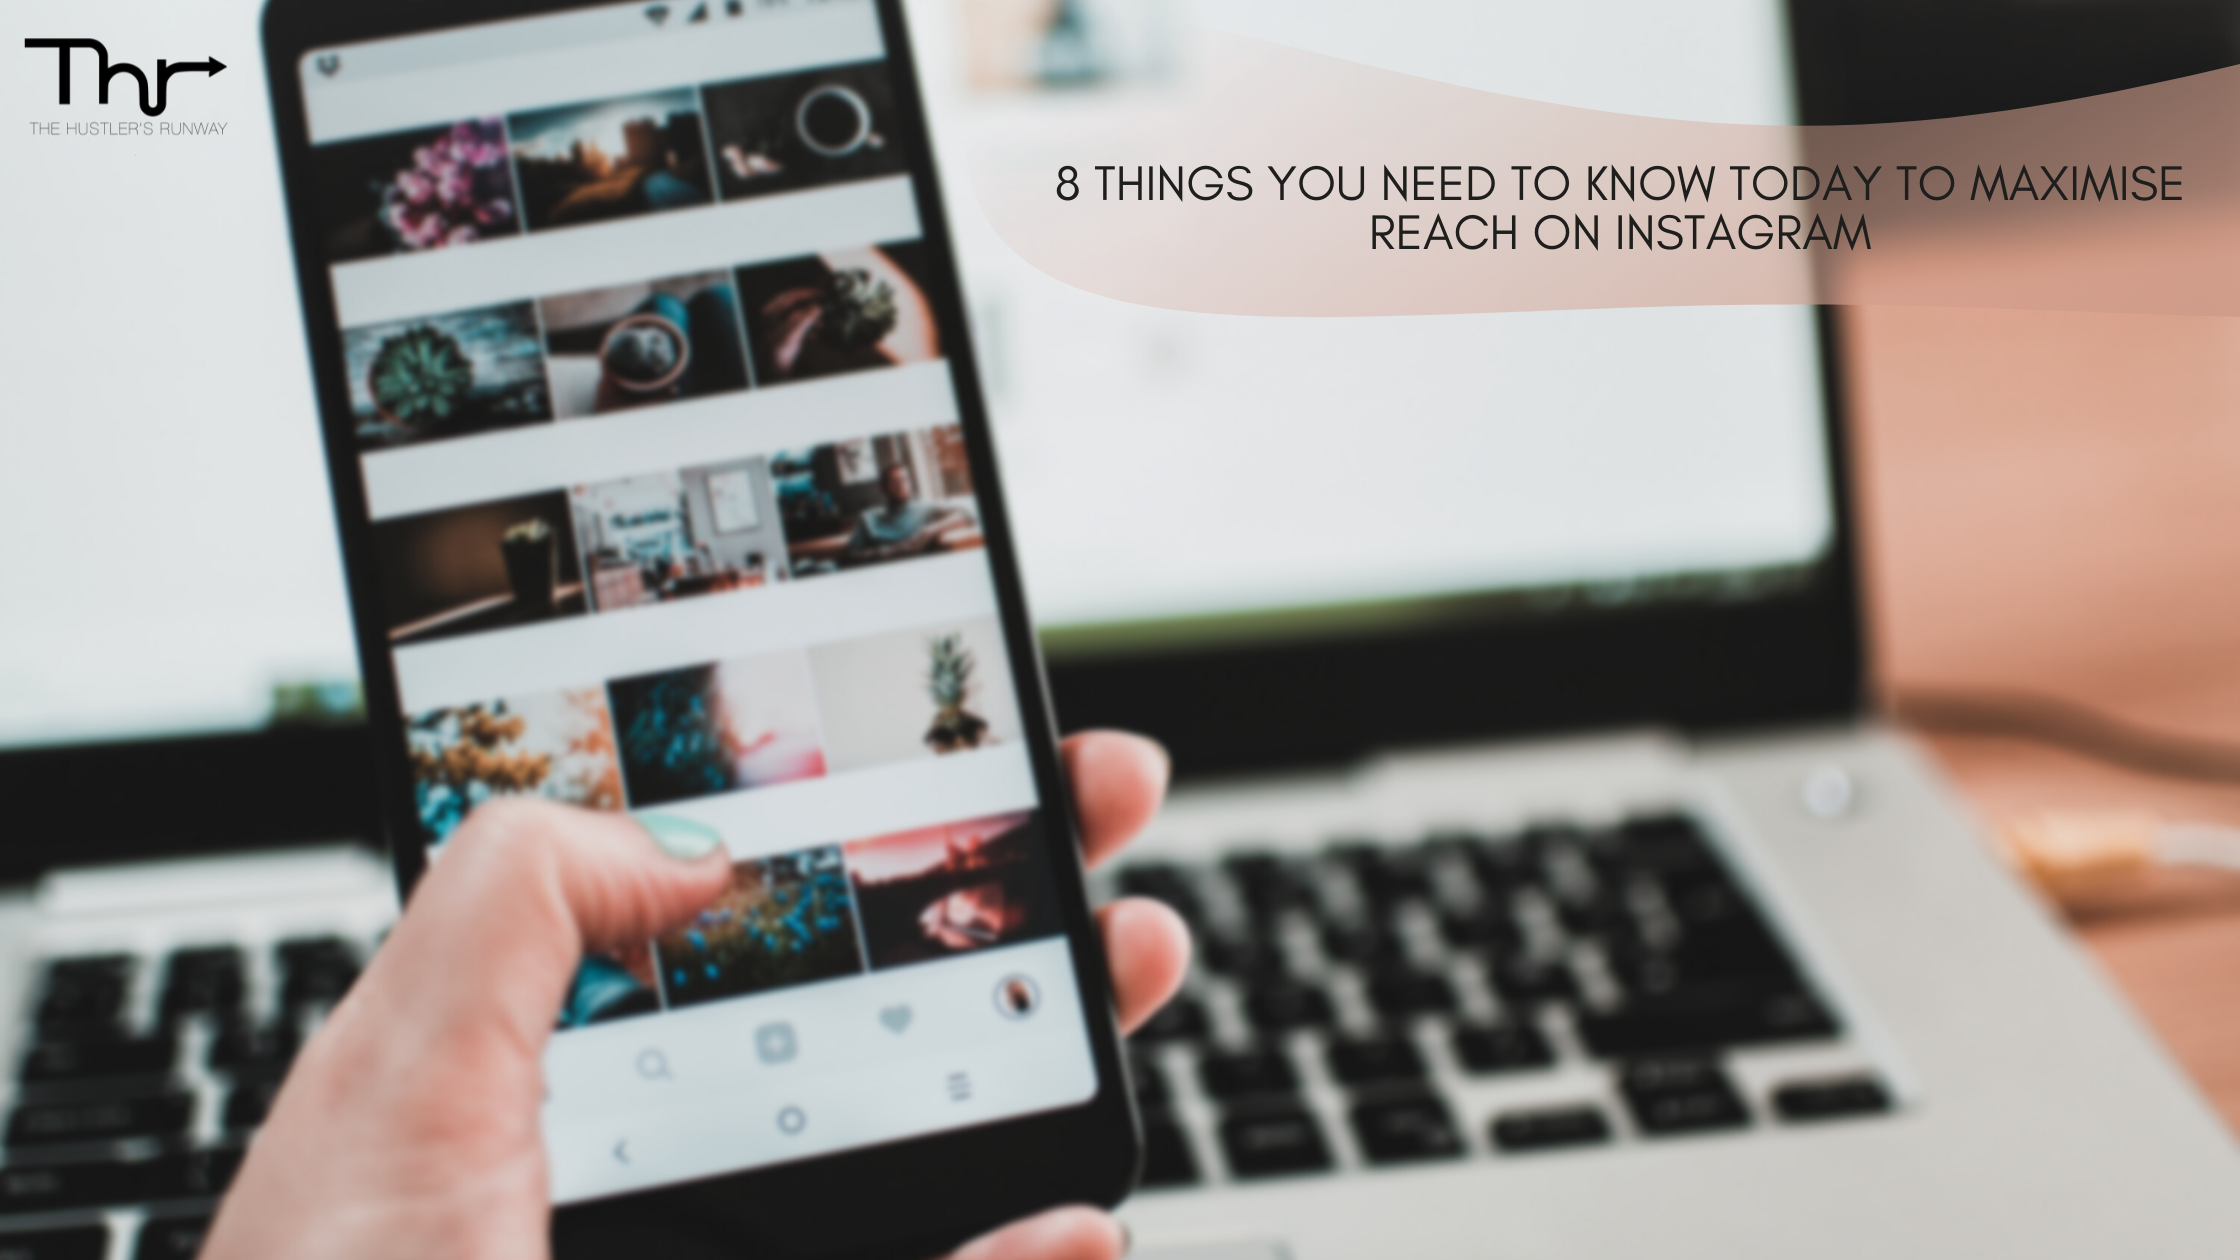 8 THINGS YOU NEED TO KNOW TODAY TO MAXIMISE REACH ON INSTAGRAM